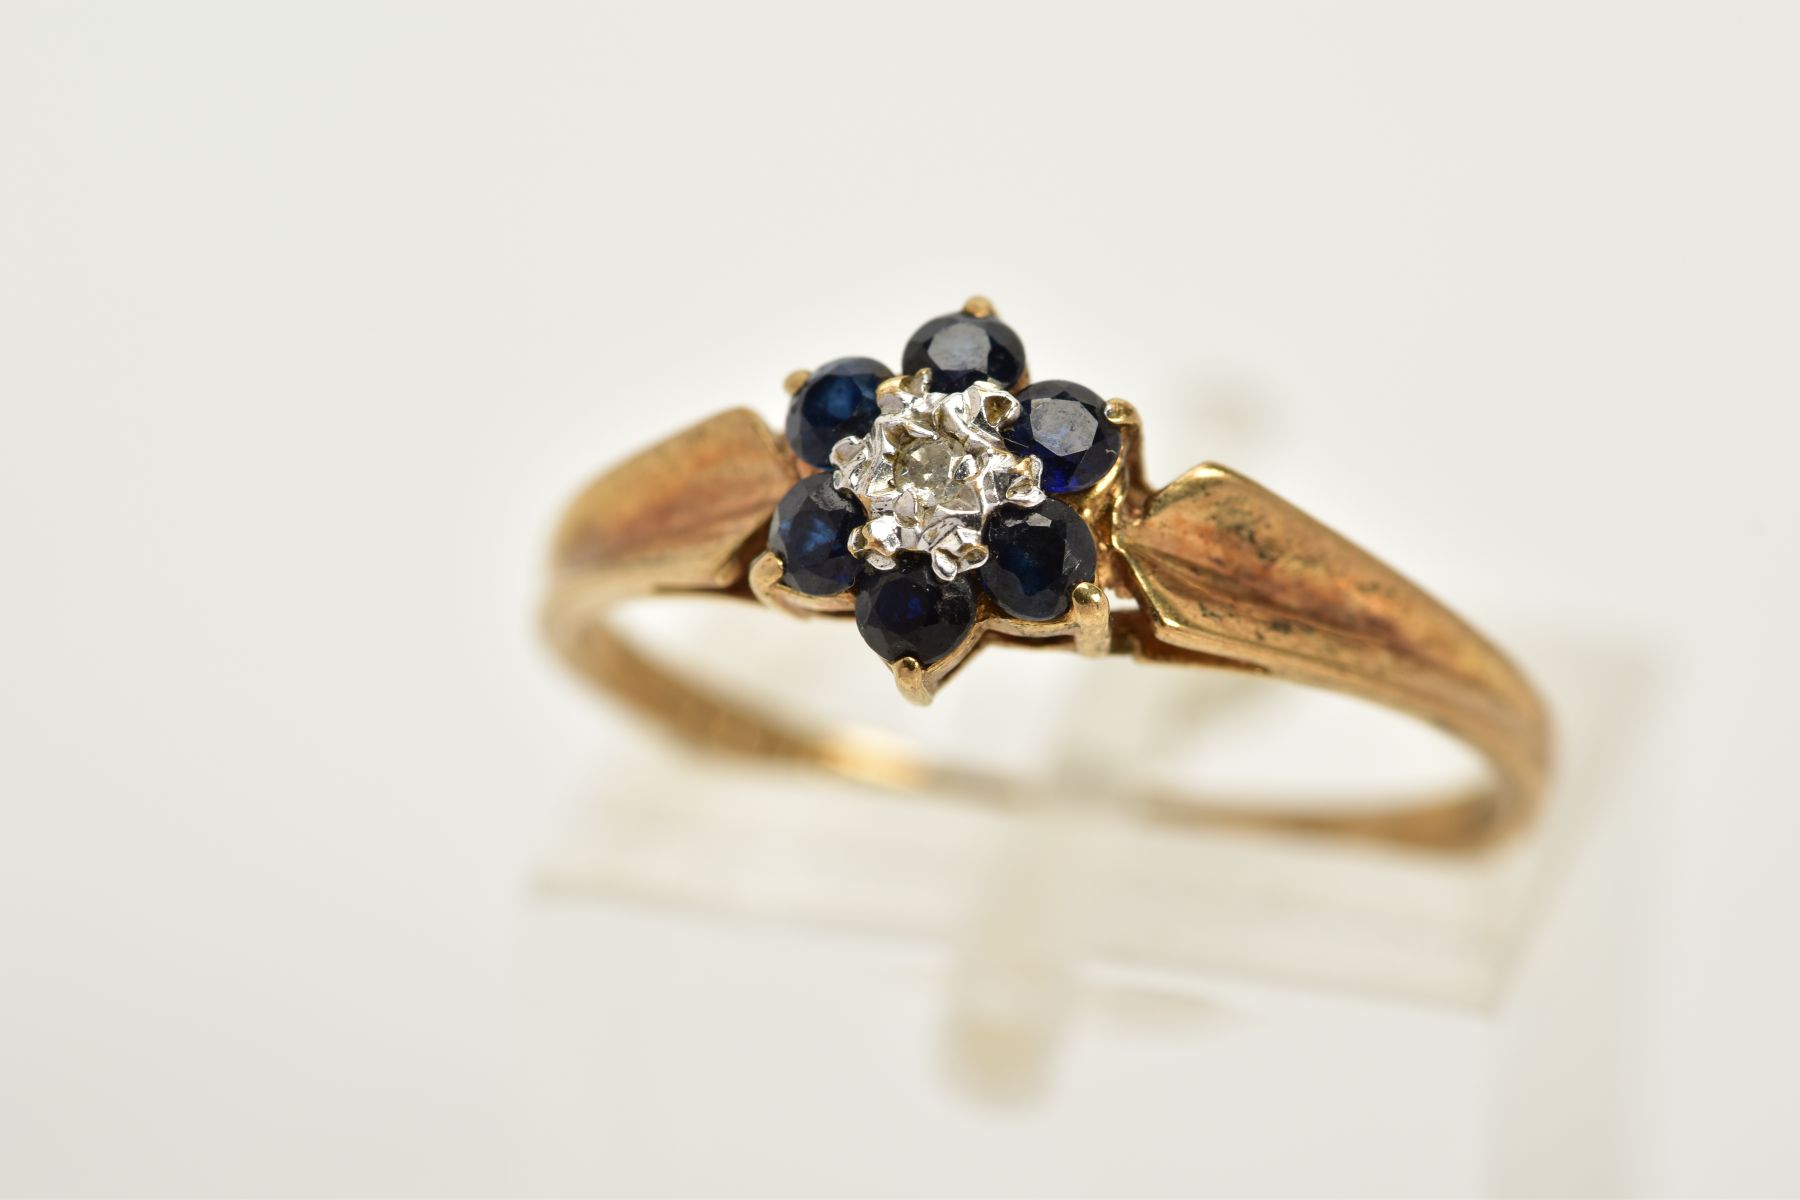 A 9CT GOLD SAPPHIRE AND DIAMOND CLUSTER RING, designed with a central single cut diamond, circular